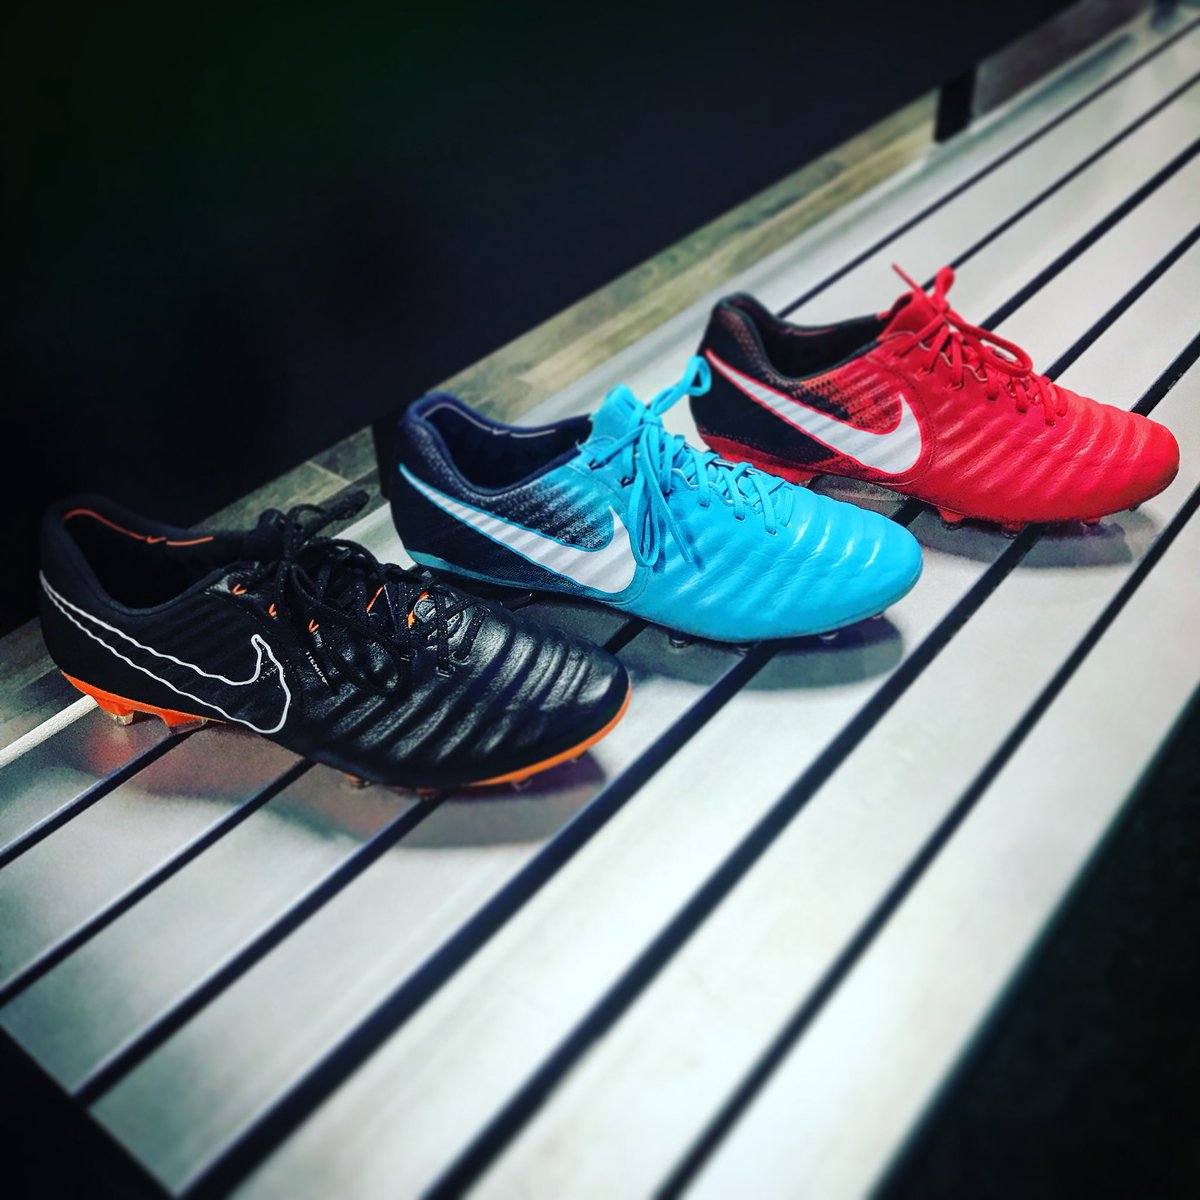 Pera eficacia Edición SoccerWorld on Twitter: "Nike Tiempo Legend 7 “Elite” Fast AF - Ice - Fire  Which do you think is the best looking color-way? 🏃‍♂️❄️🔥 #Nike  #NikeFootball #Tiempo #Legend #TiempoLegend #Legend7 #Soccer #Futbol #